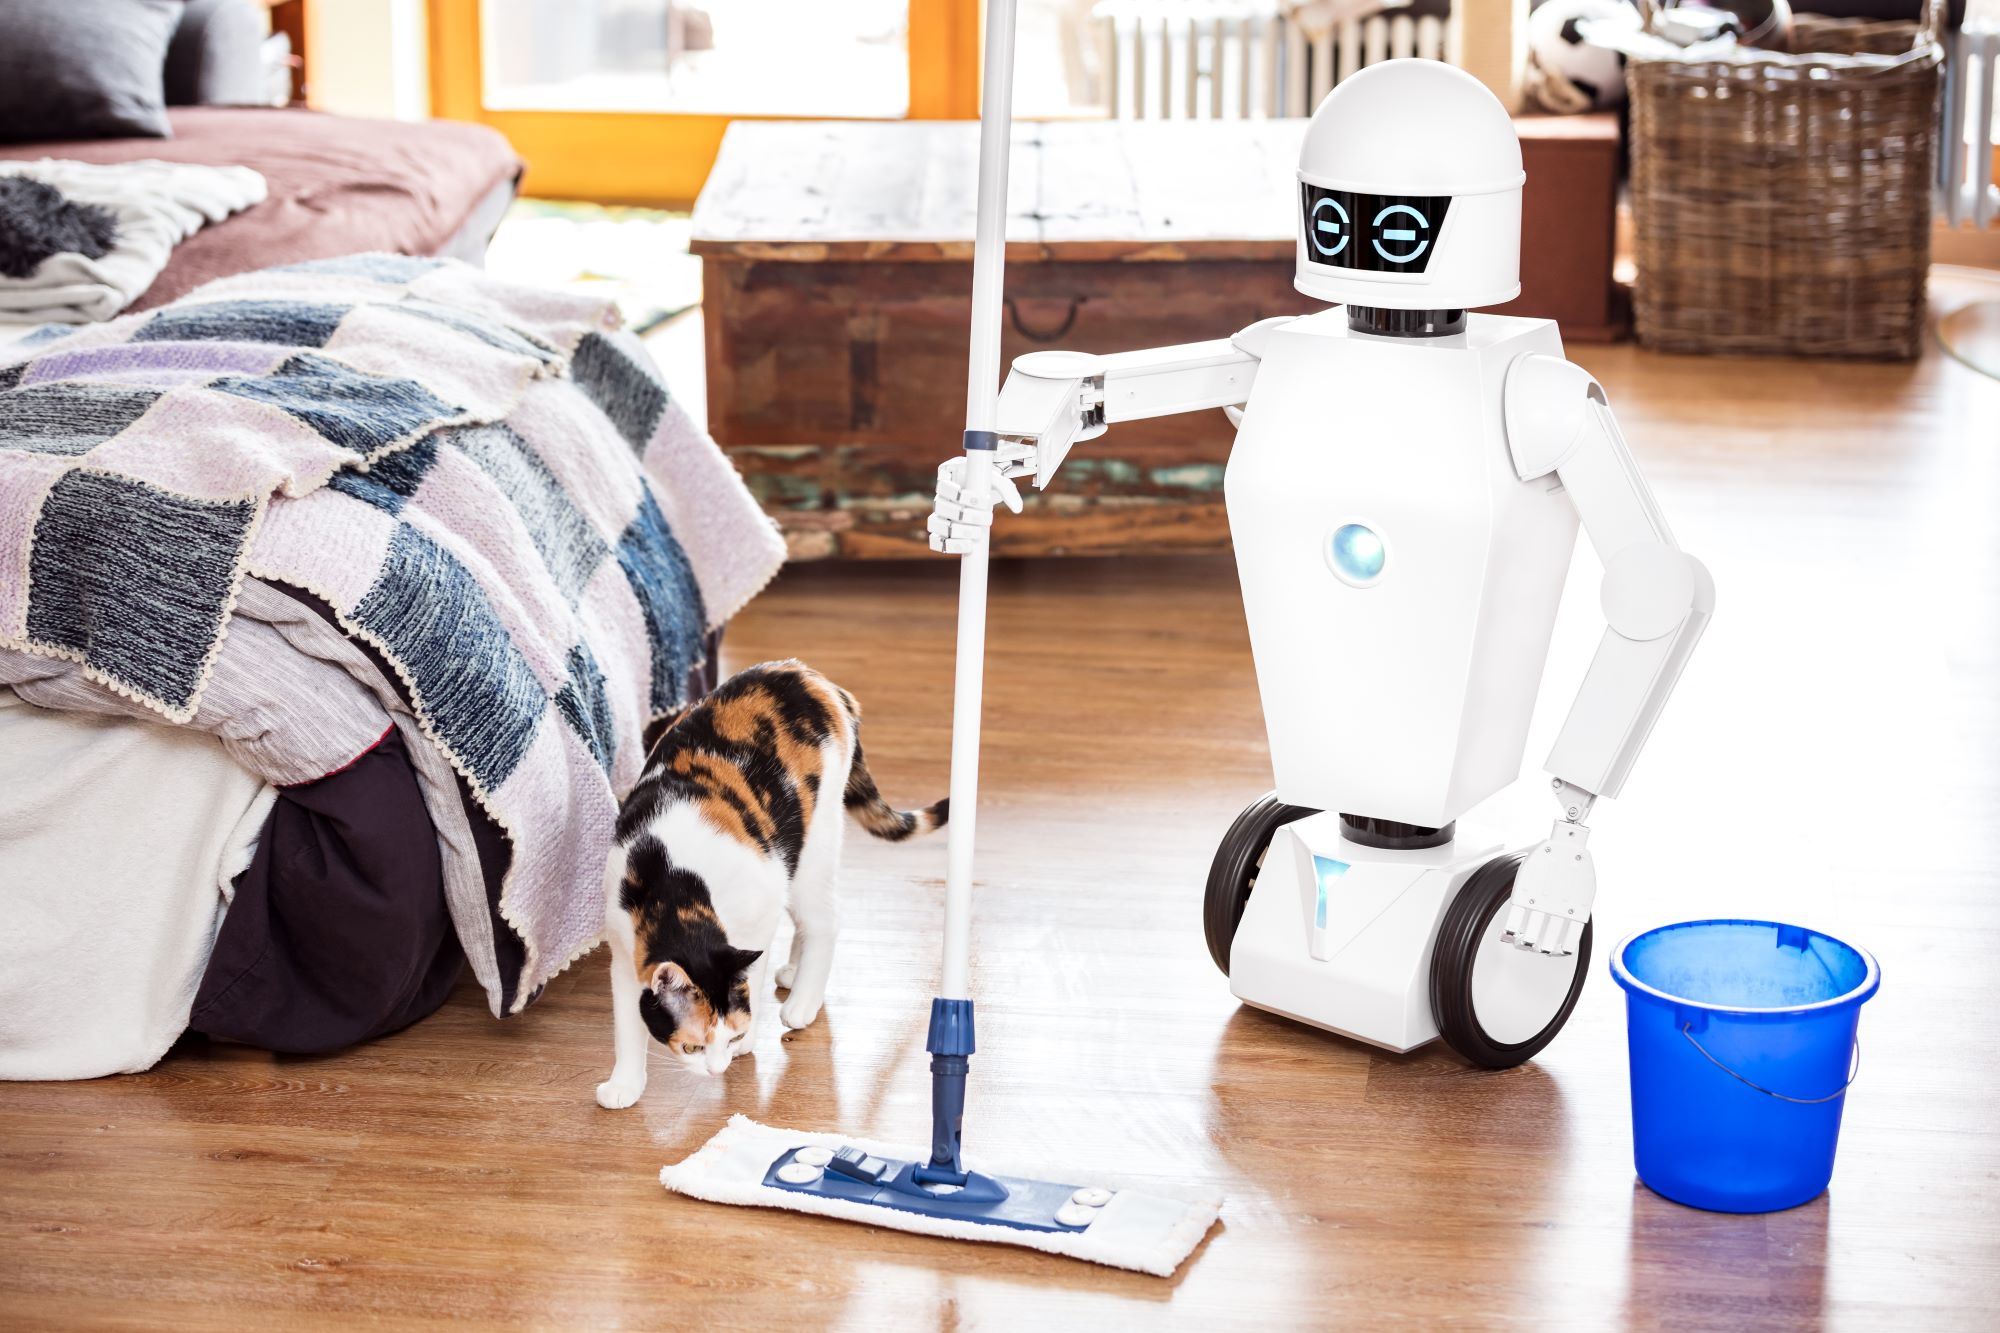 Domestic robots could be a common sight in our homes in the not-so-distant future. Image: Miriam Doerr Martin Frommherz / Shutterstock